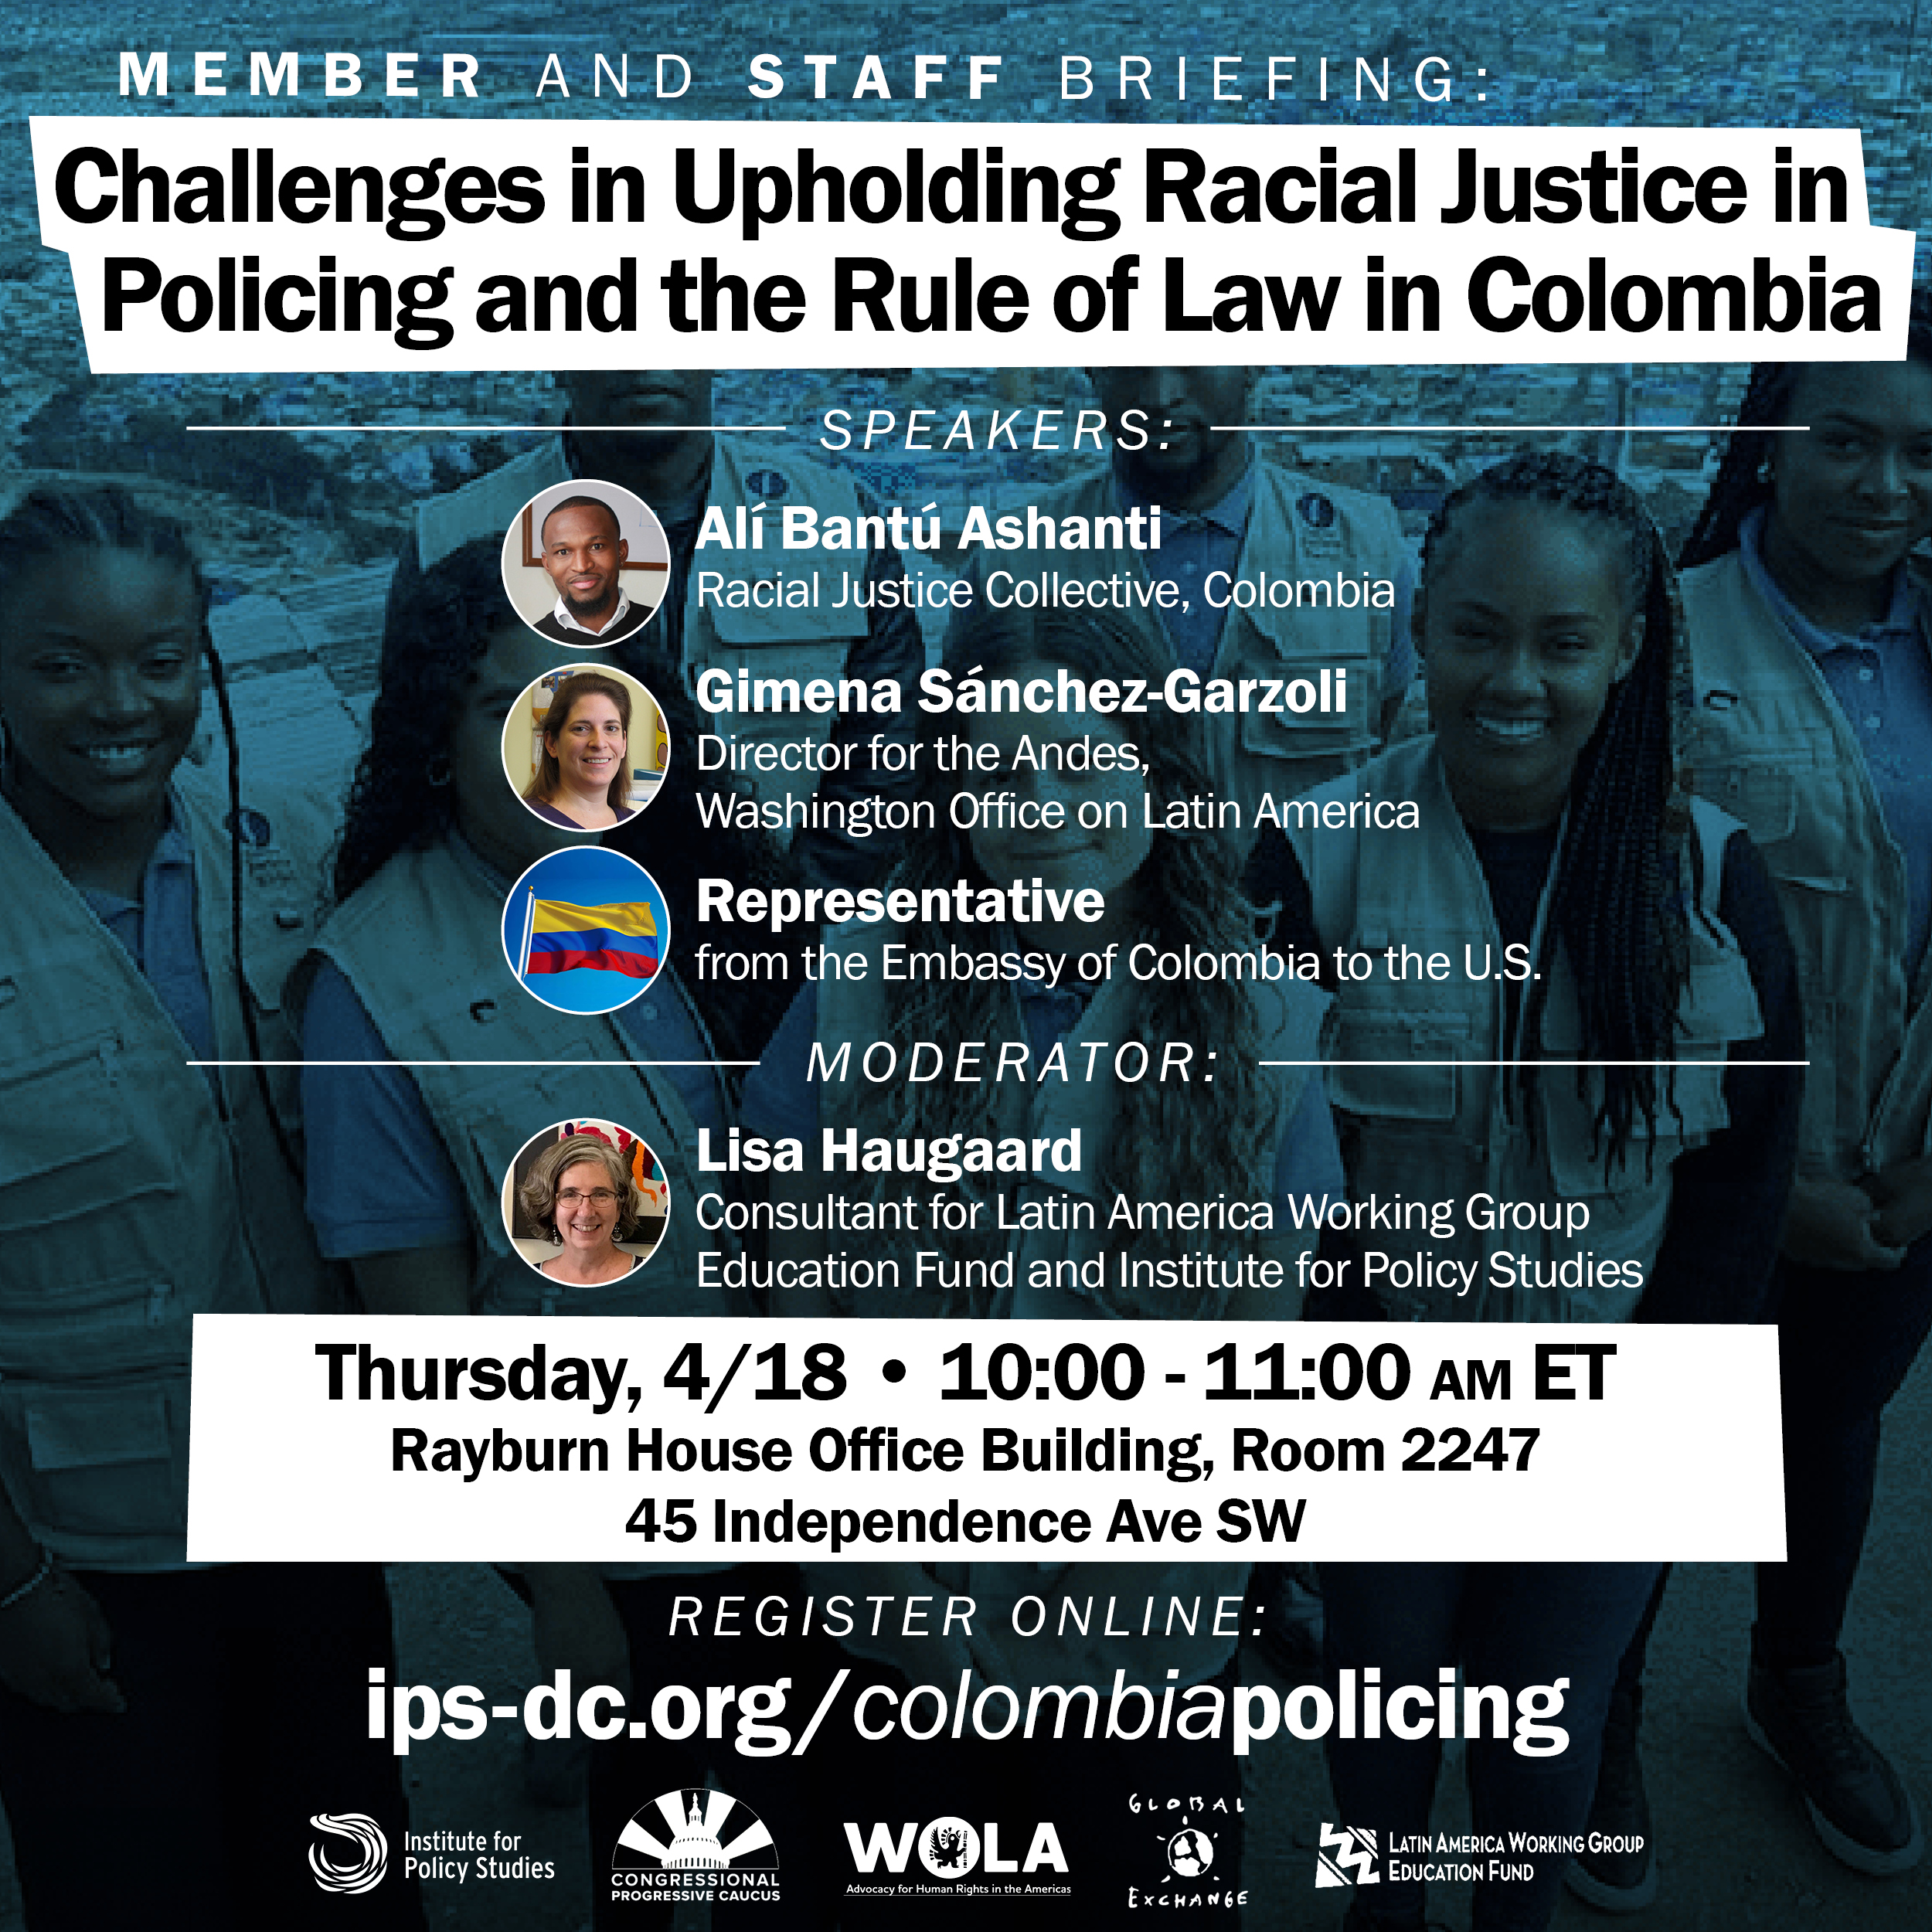 BRIEFING: Challenges in Upholding Racial Justice in Policing and the Rule of Law in Colombia